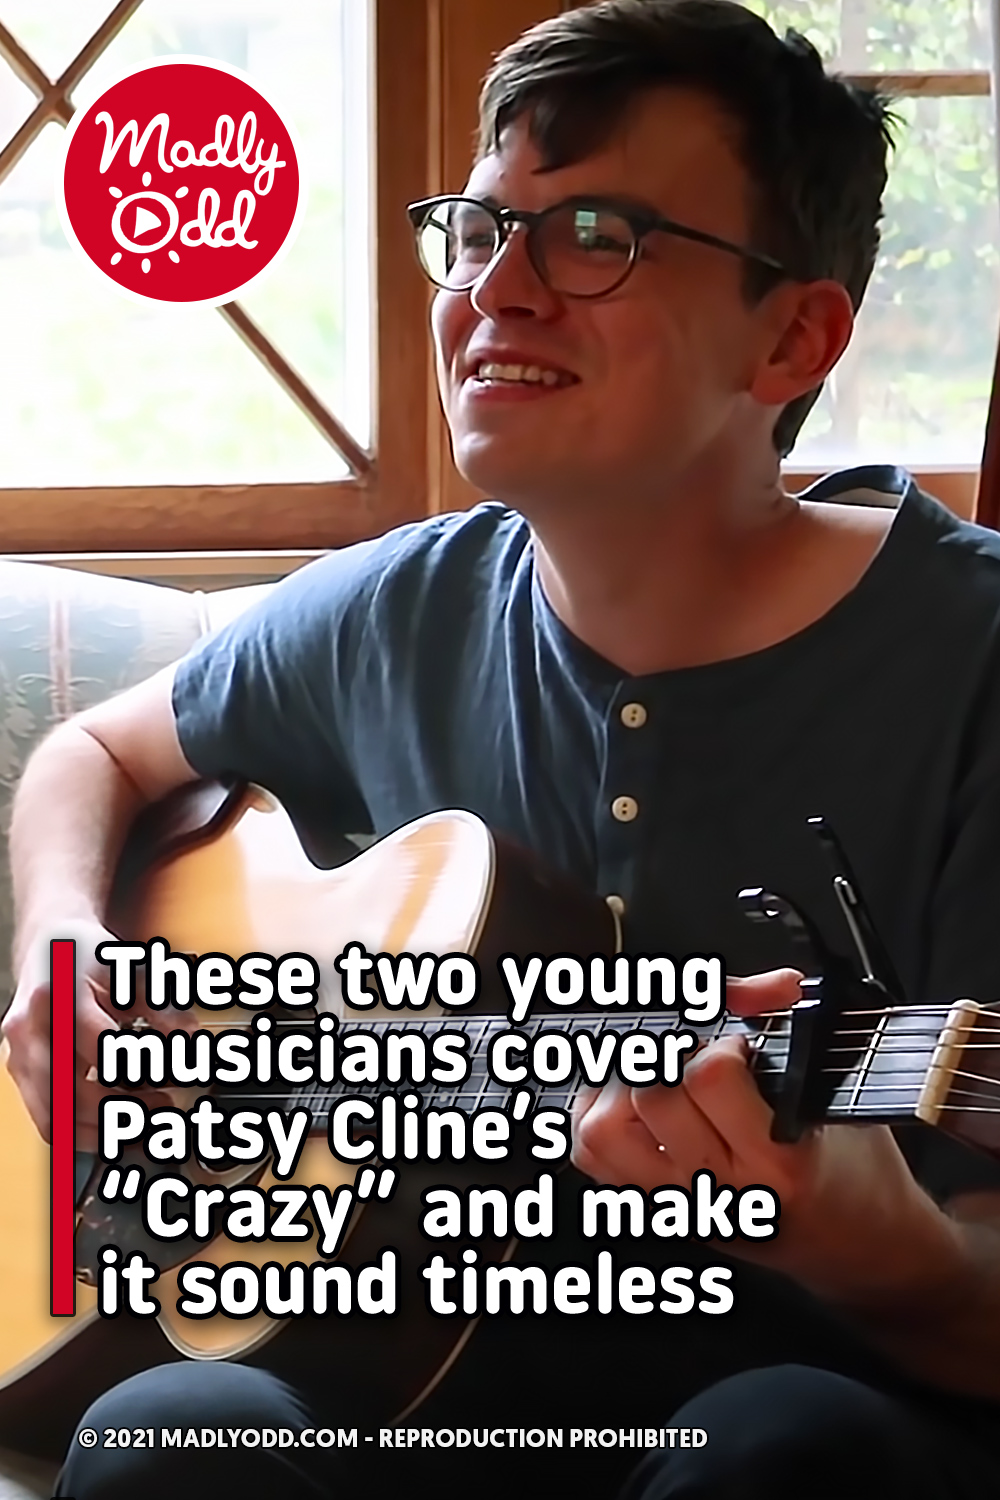 These two young musicians cover Patsy Cline’s “Crazy” and make it sound timeless